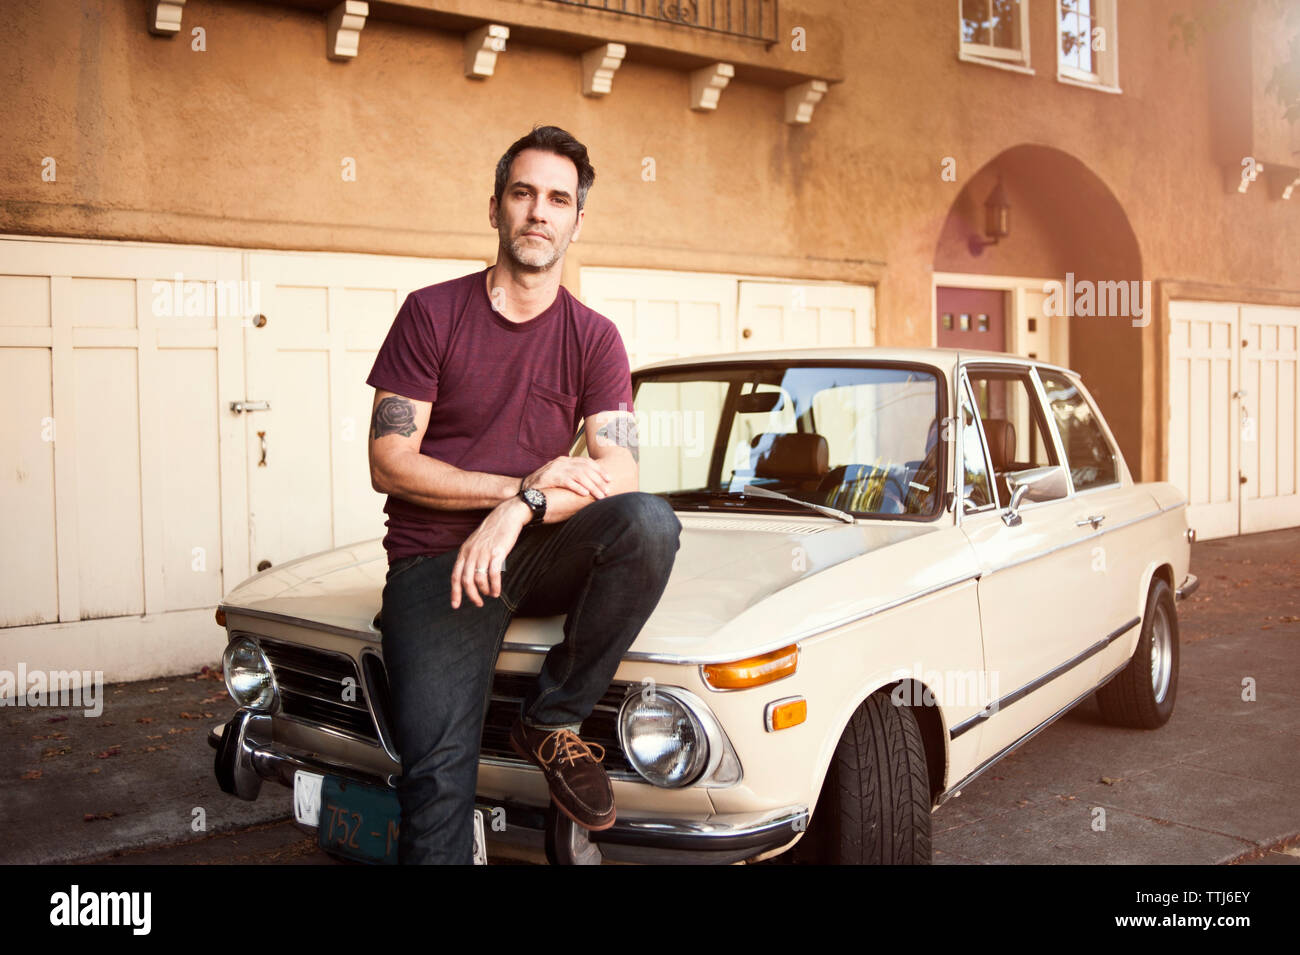 Portrait of man standing by car Stock Photo